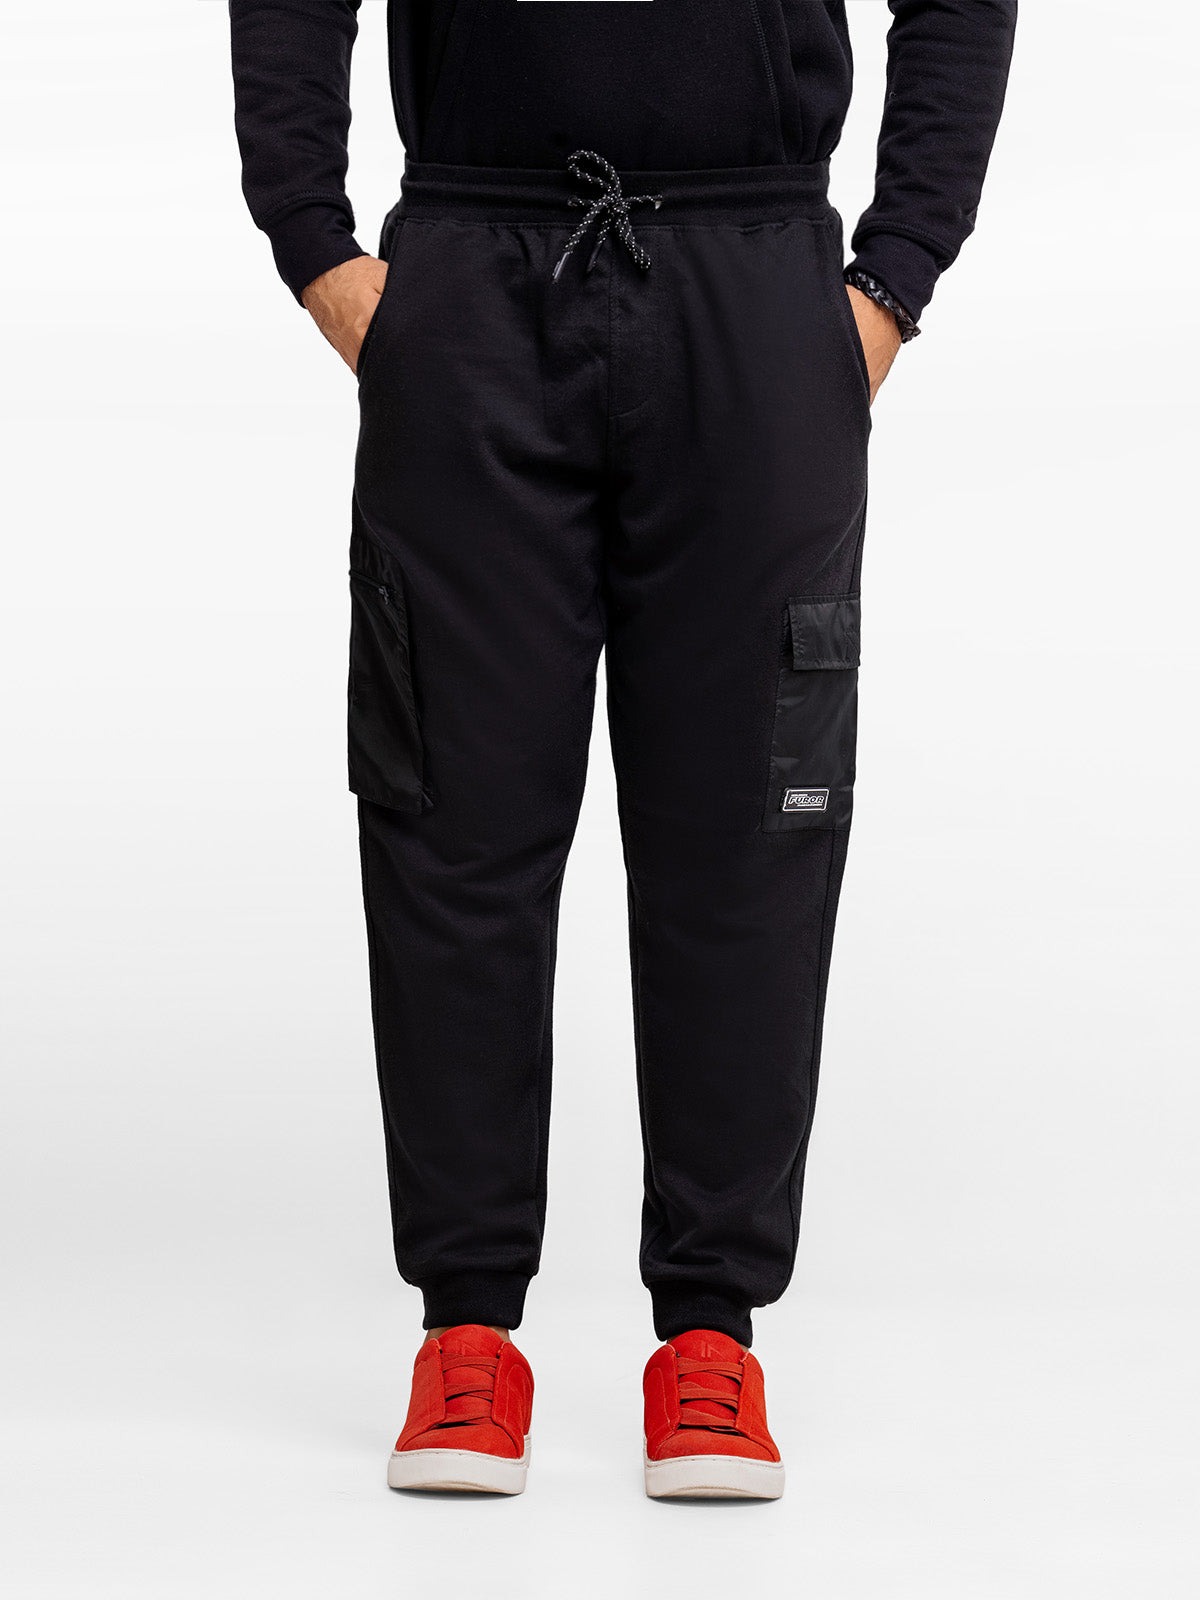 Knitted Cargo Pants - FMBT23-061